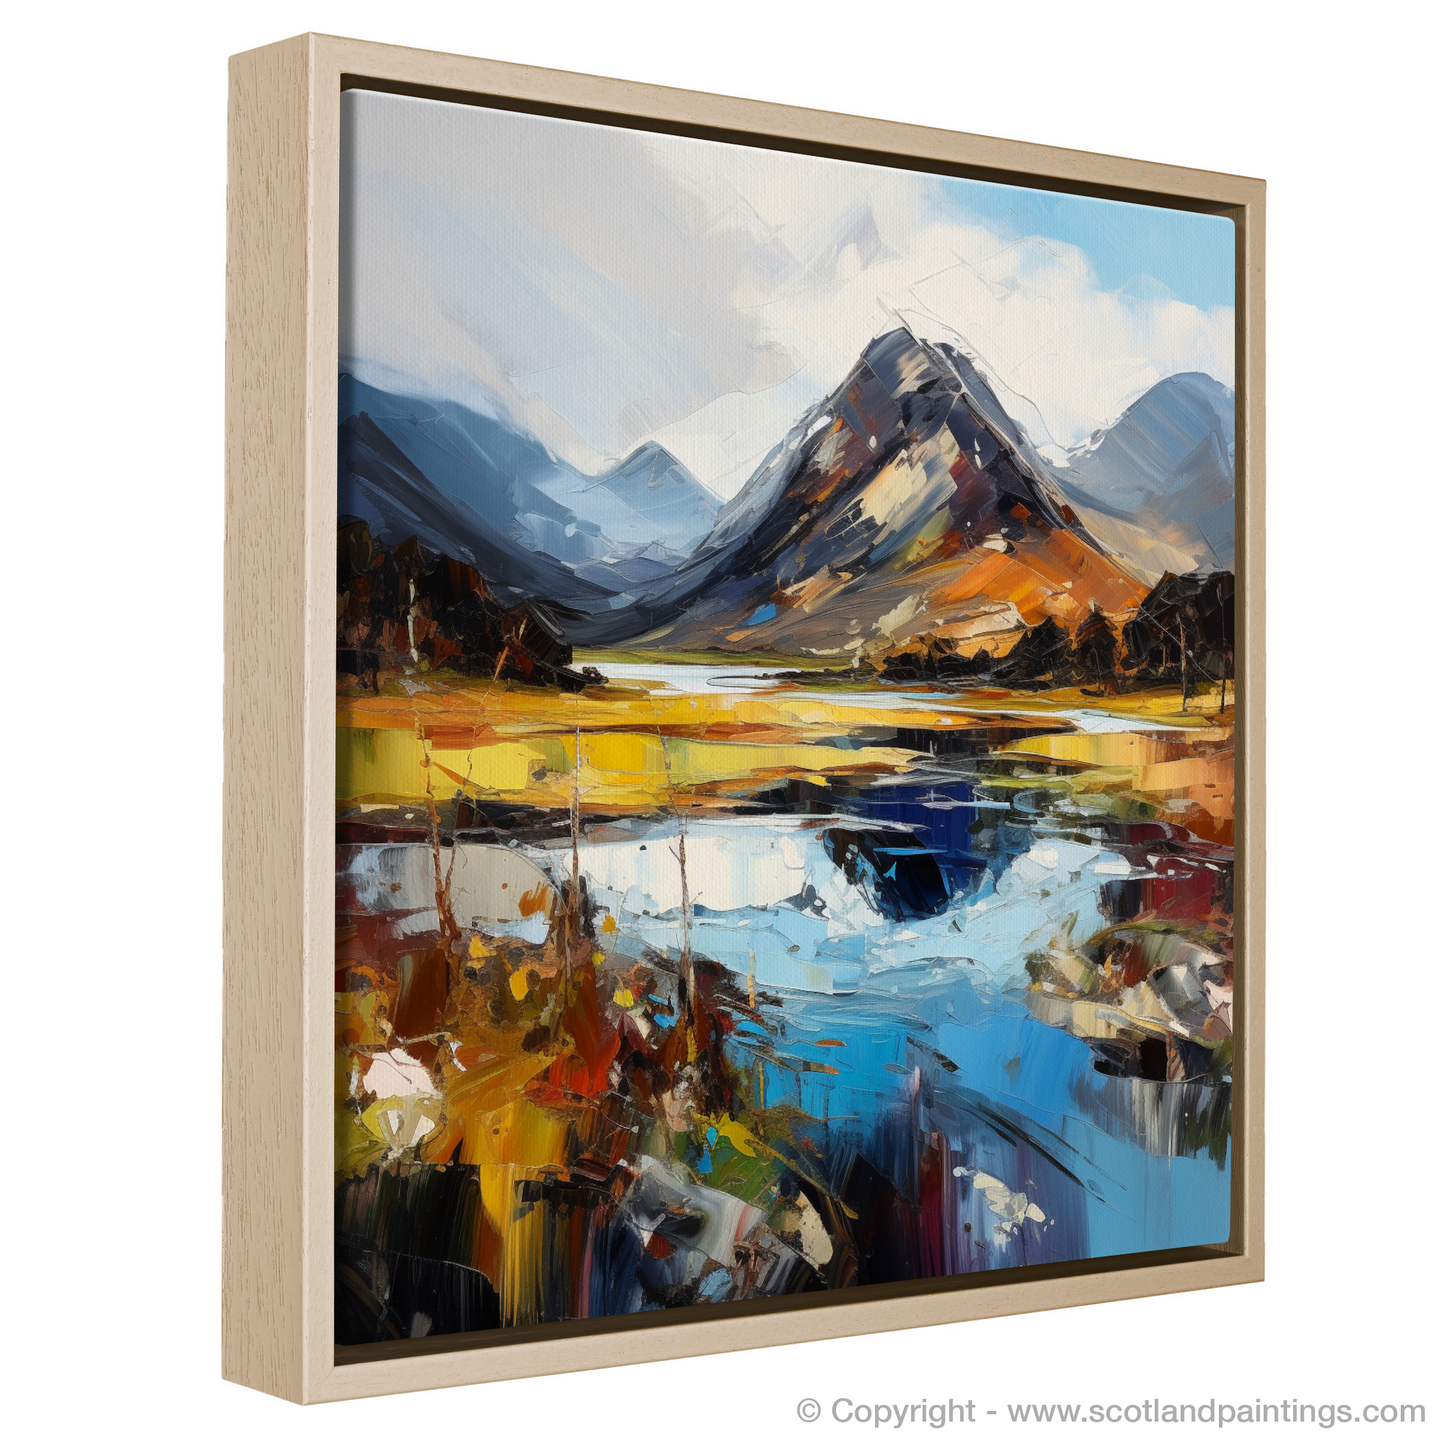 Painting and Art Print of Glen Sannox, Isle of Arran entitled "Glen Sannox Majesty: An Expressionist Ode to the Scottish Highlands".